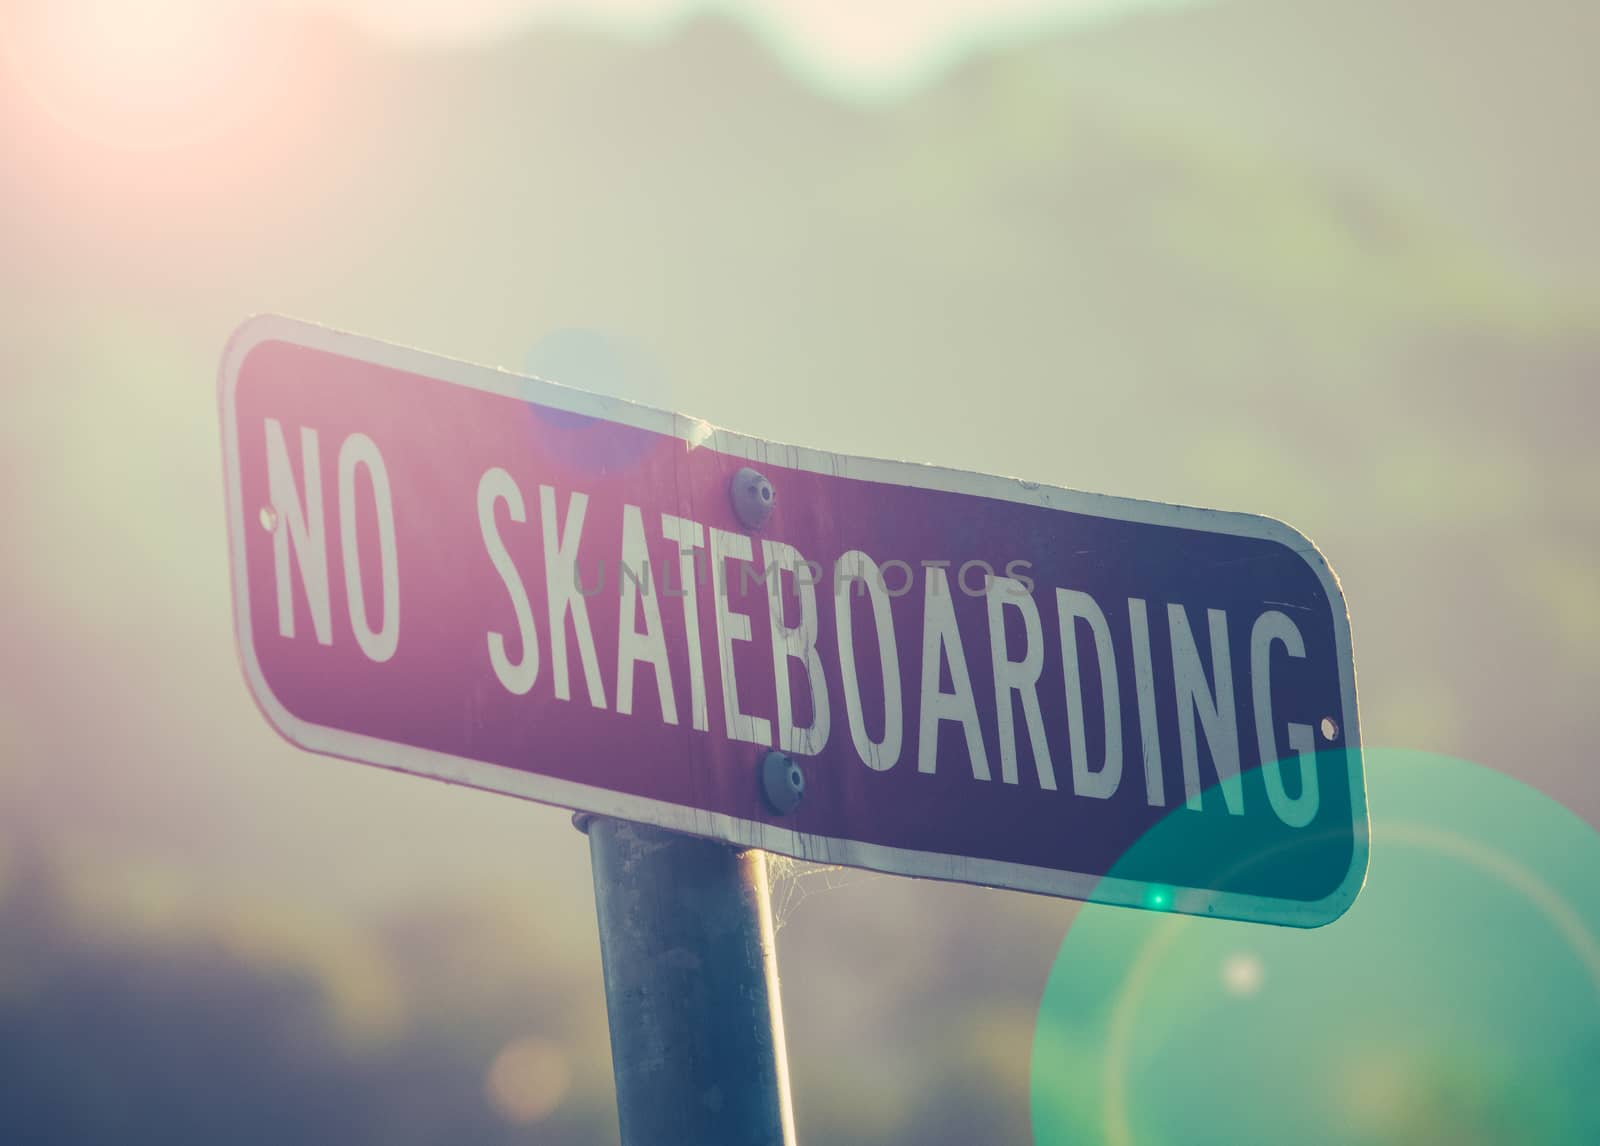 Retro Style Photo Of A No Skateboarding Sign At Sunset With Lens Flare